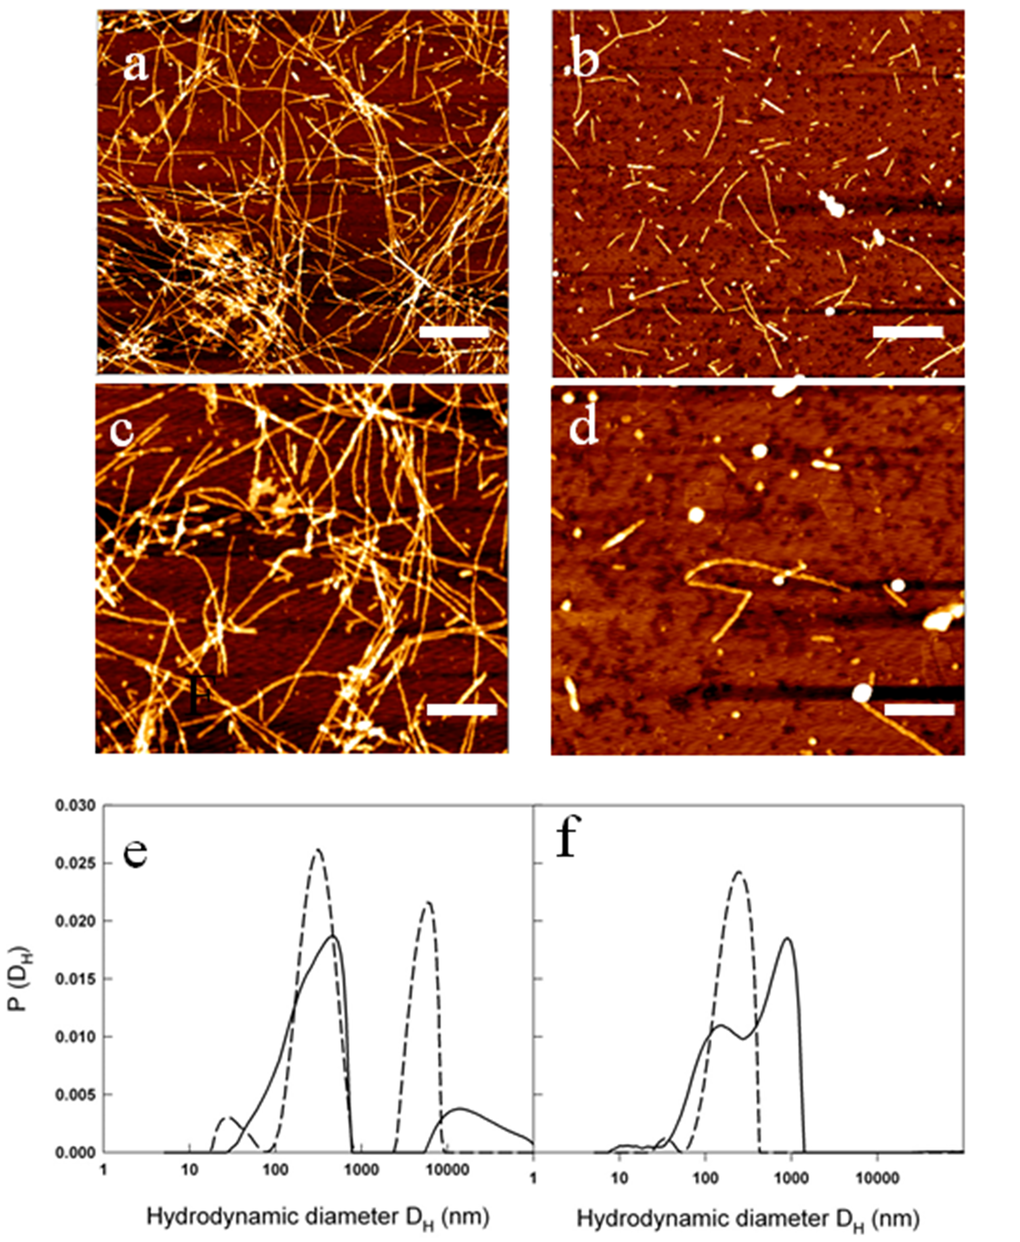 Metformin effects on fibril size and growth. (a-d) AFM images acquired for: 50 µM Aβ1-40 at the end of the kinetics at 37 °C and 200 rpm at two different magnifications: scale bar = 1μm and Z-range = 8.9 nm (a); scale bar = 500 nm; Z-range = 8.3 nm (b). The samples were compared with 50 µM Aβ1-40 + 2 mM metformin at the end of the kinetics at 37 °C and 200 rpm at two different magnifications: scale bar = 1μm and Z-range = 7.0 nm (c); scale bar = 500 nm; Z-range = 8.3 nm (d). Particle size distribution from DLS of 50 µM Aβ1-40 incubated at 37 °C and 200 rpm in the absence (e) and in the presence (f) of 2mM metformin after 0.5 h (dashed lines) and 2 hrs (solid lines) from the beginning of amyloid aggregation process.